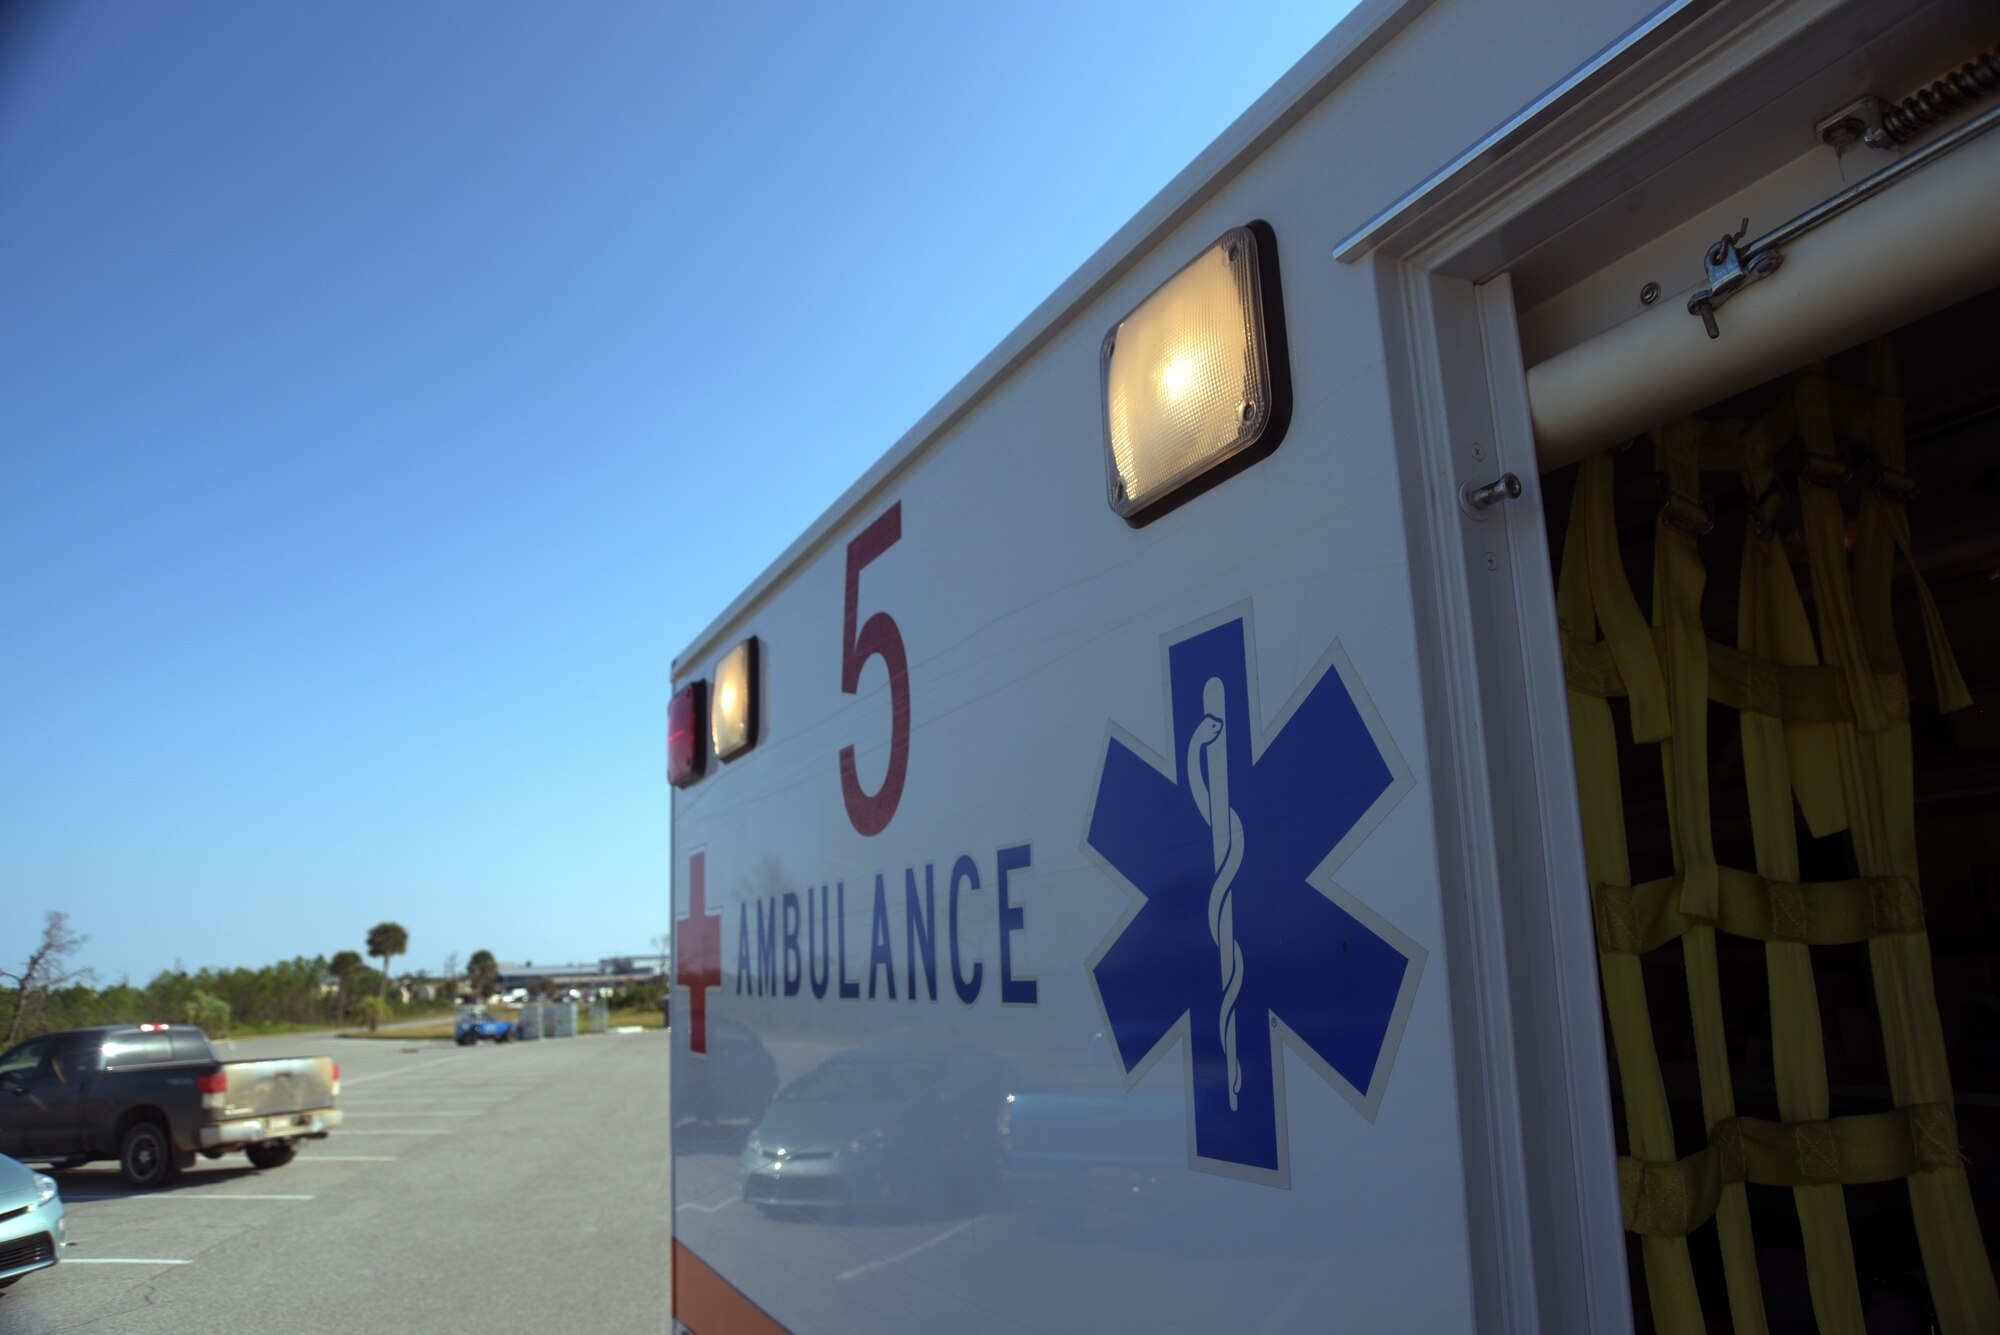 The 325th Operational Medical Readiness Squadron Ambulance Services Department’s Med 5 response vehicle is pictured Oct. 4, 2019, at Tyndall Air Force Base, Florida. Medical treatment vehicles are used to transport Airmen to and from medical response scenes when emergency patient care is needed for the Tyndall community. (U.S. Air Force photo by Staff Sgt. Magen M. Reeves)